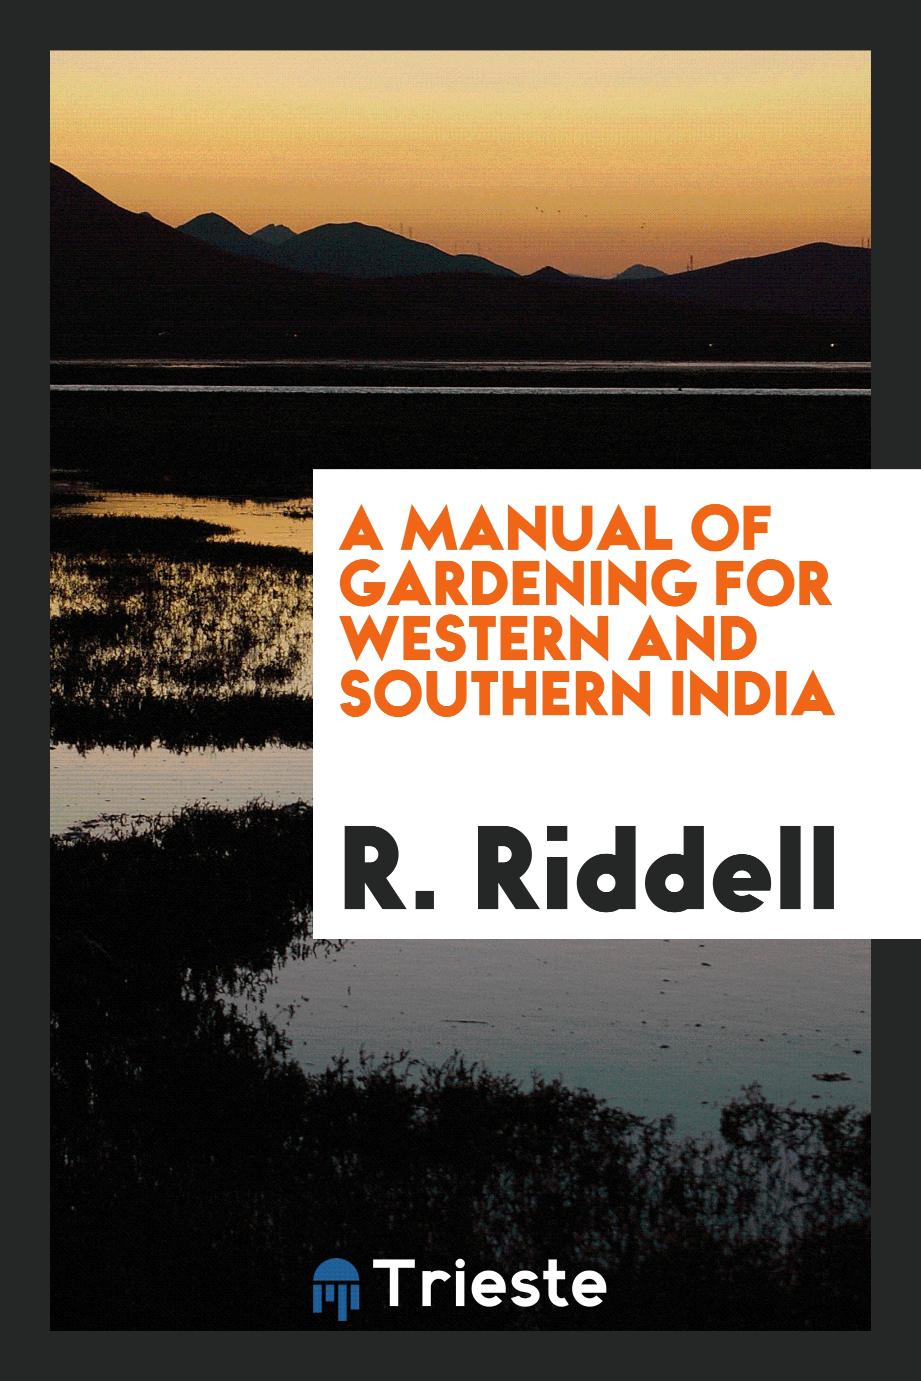 A manual of gardening for western and southern India